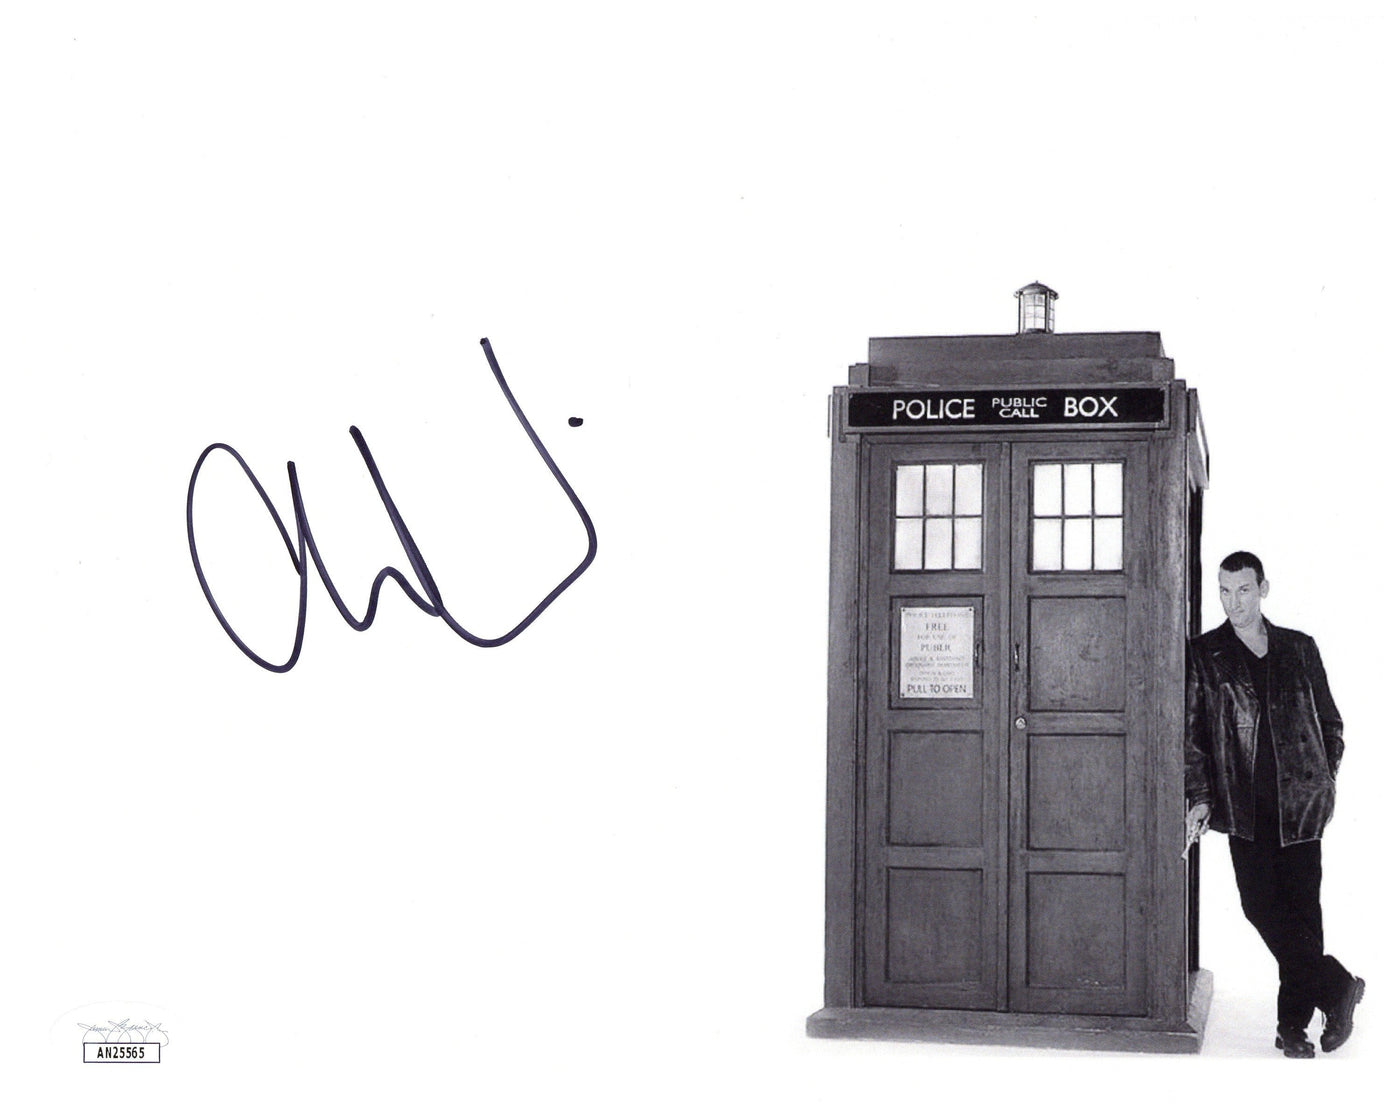 Christopher Eccleston Signed 8x10 Photo Doctor Who Autographed JSA COA #4